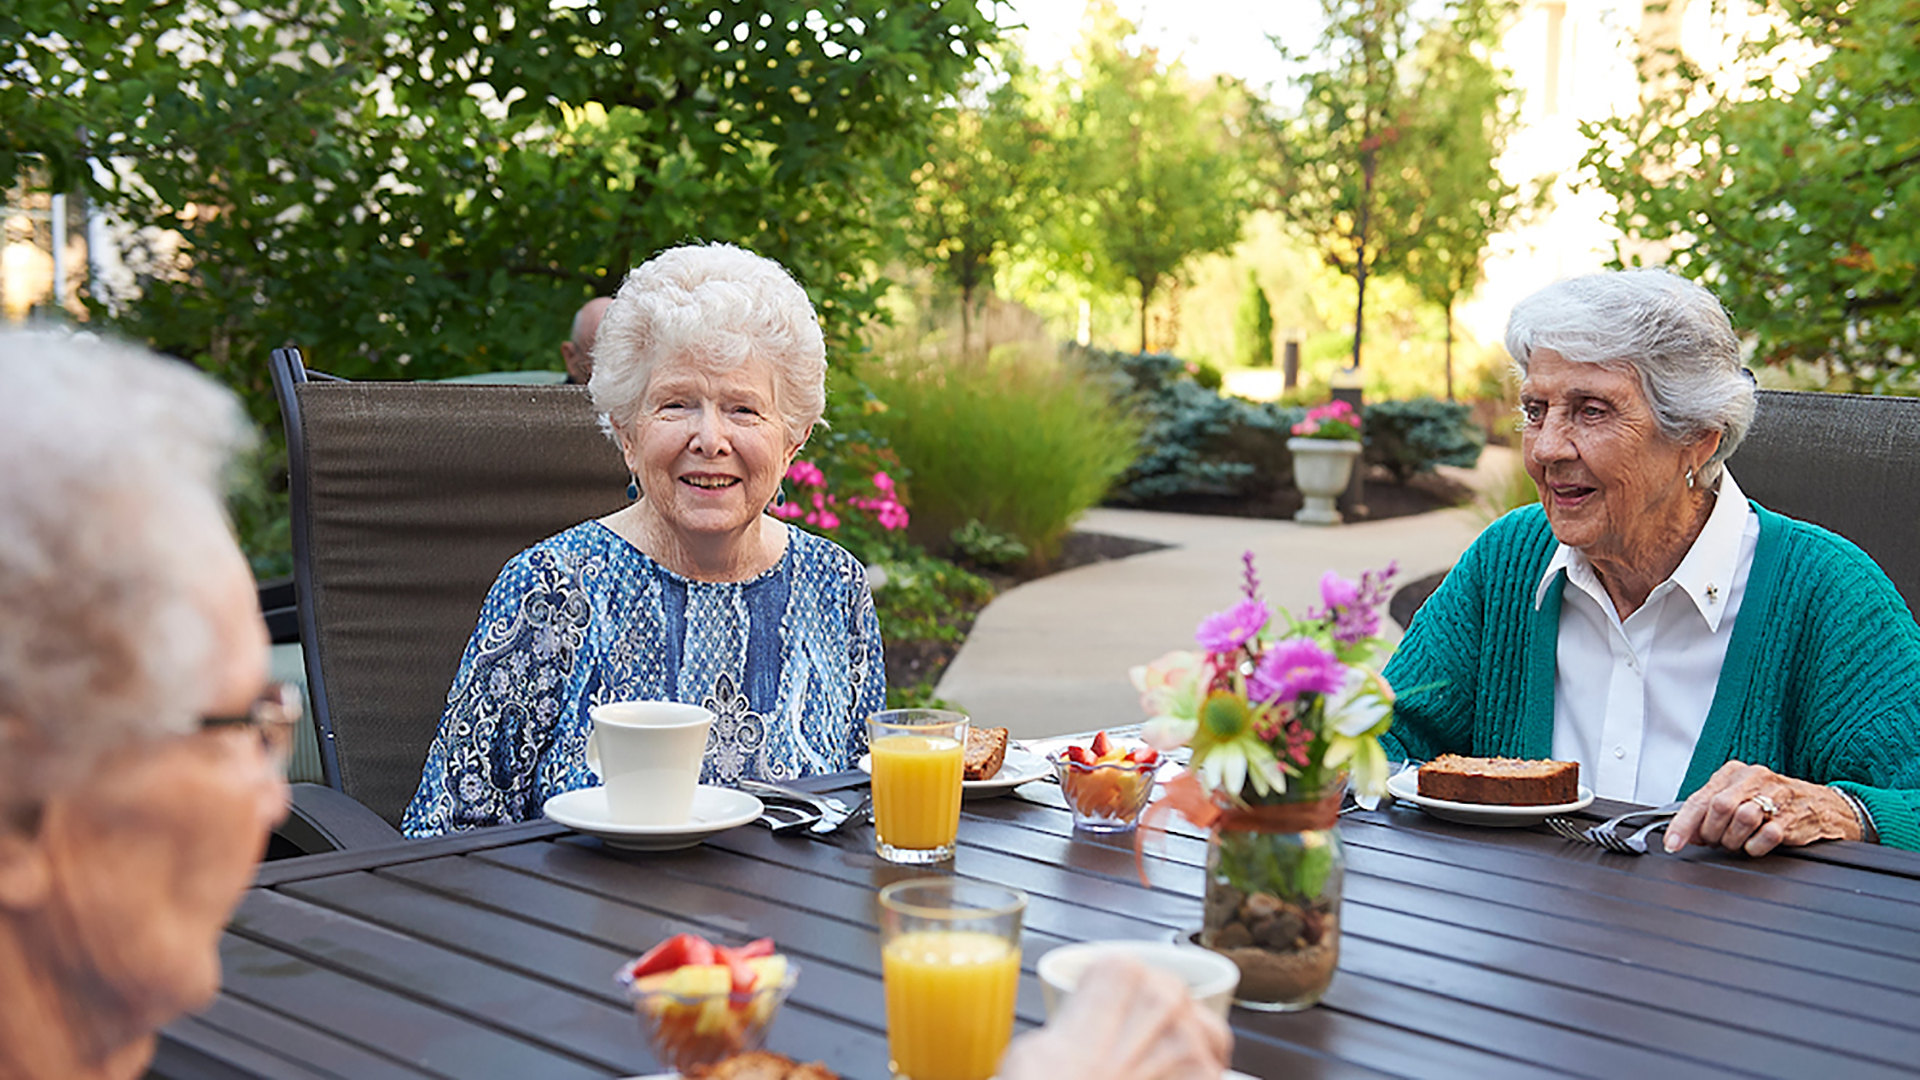 Featured image for “Why Socializing Is So Good for Older Adults”